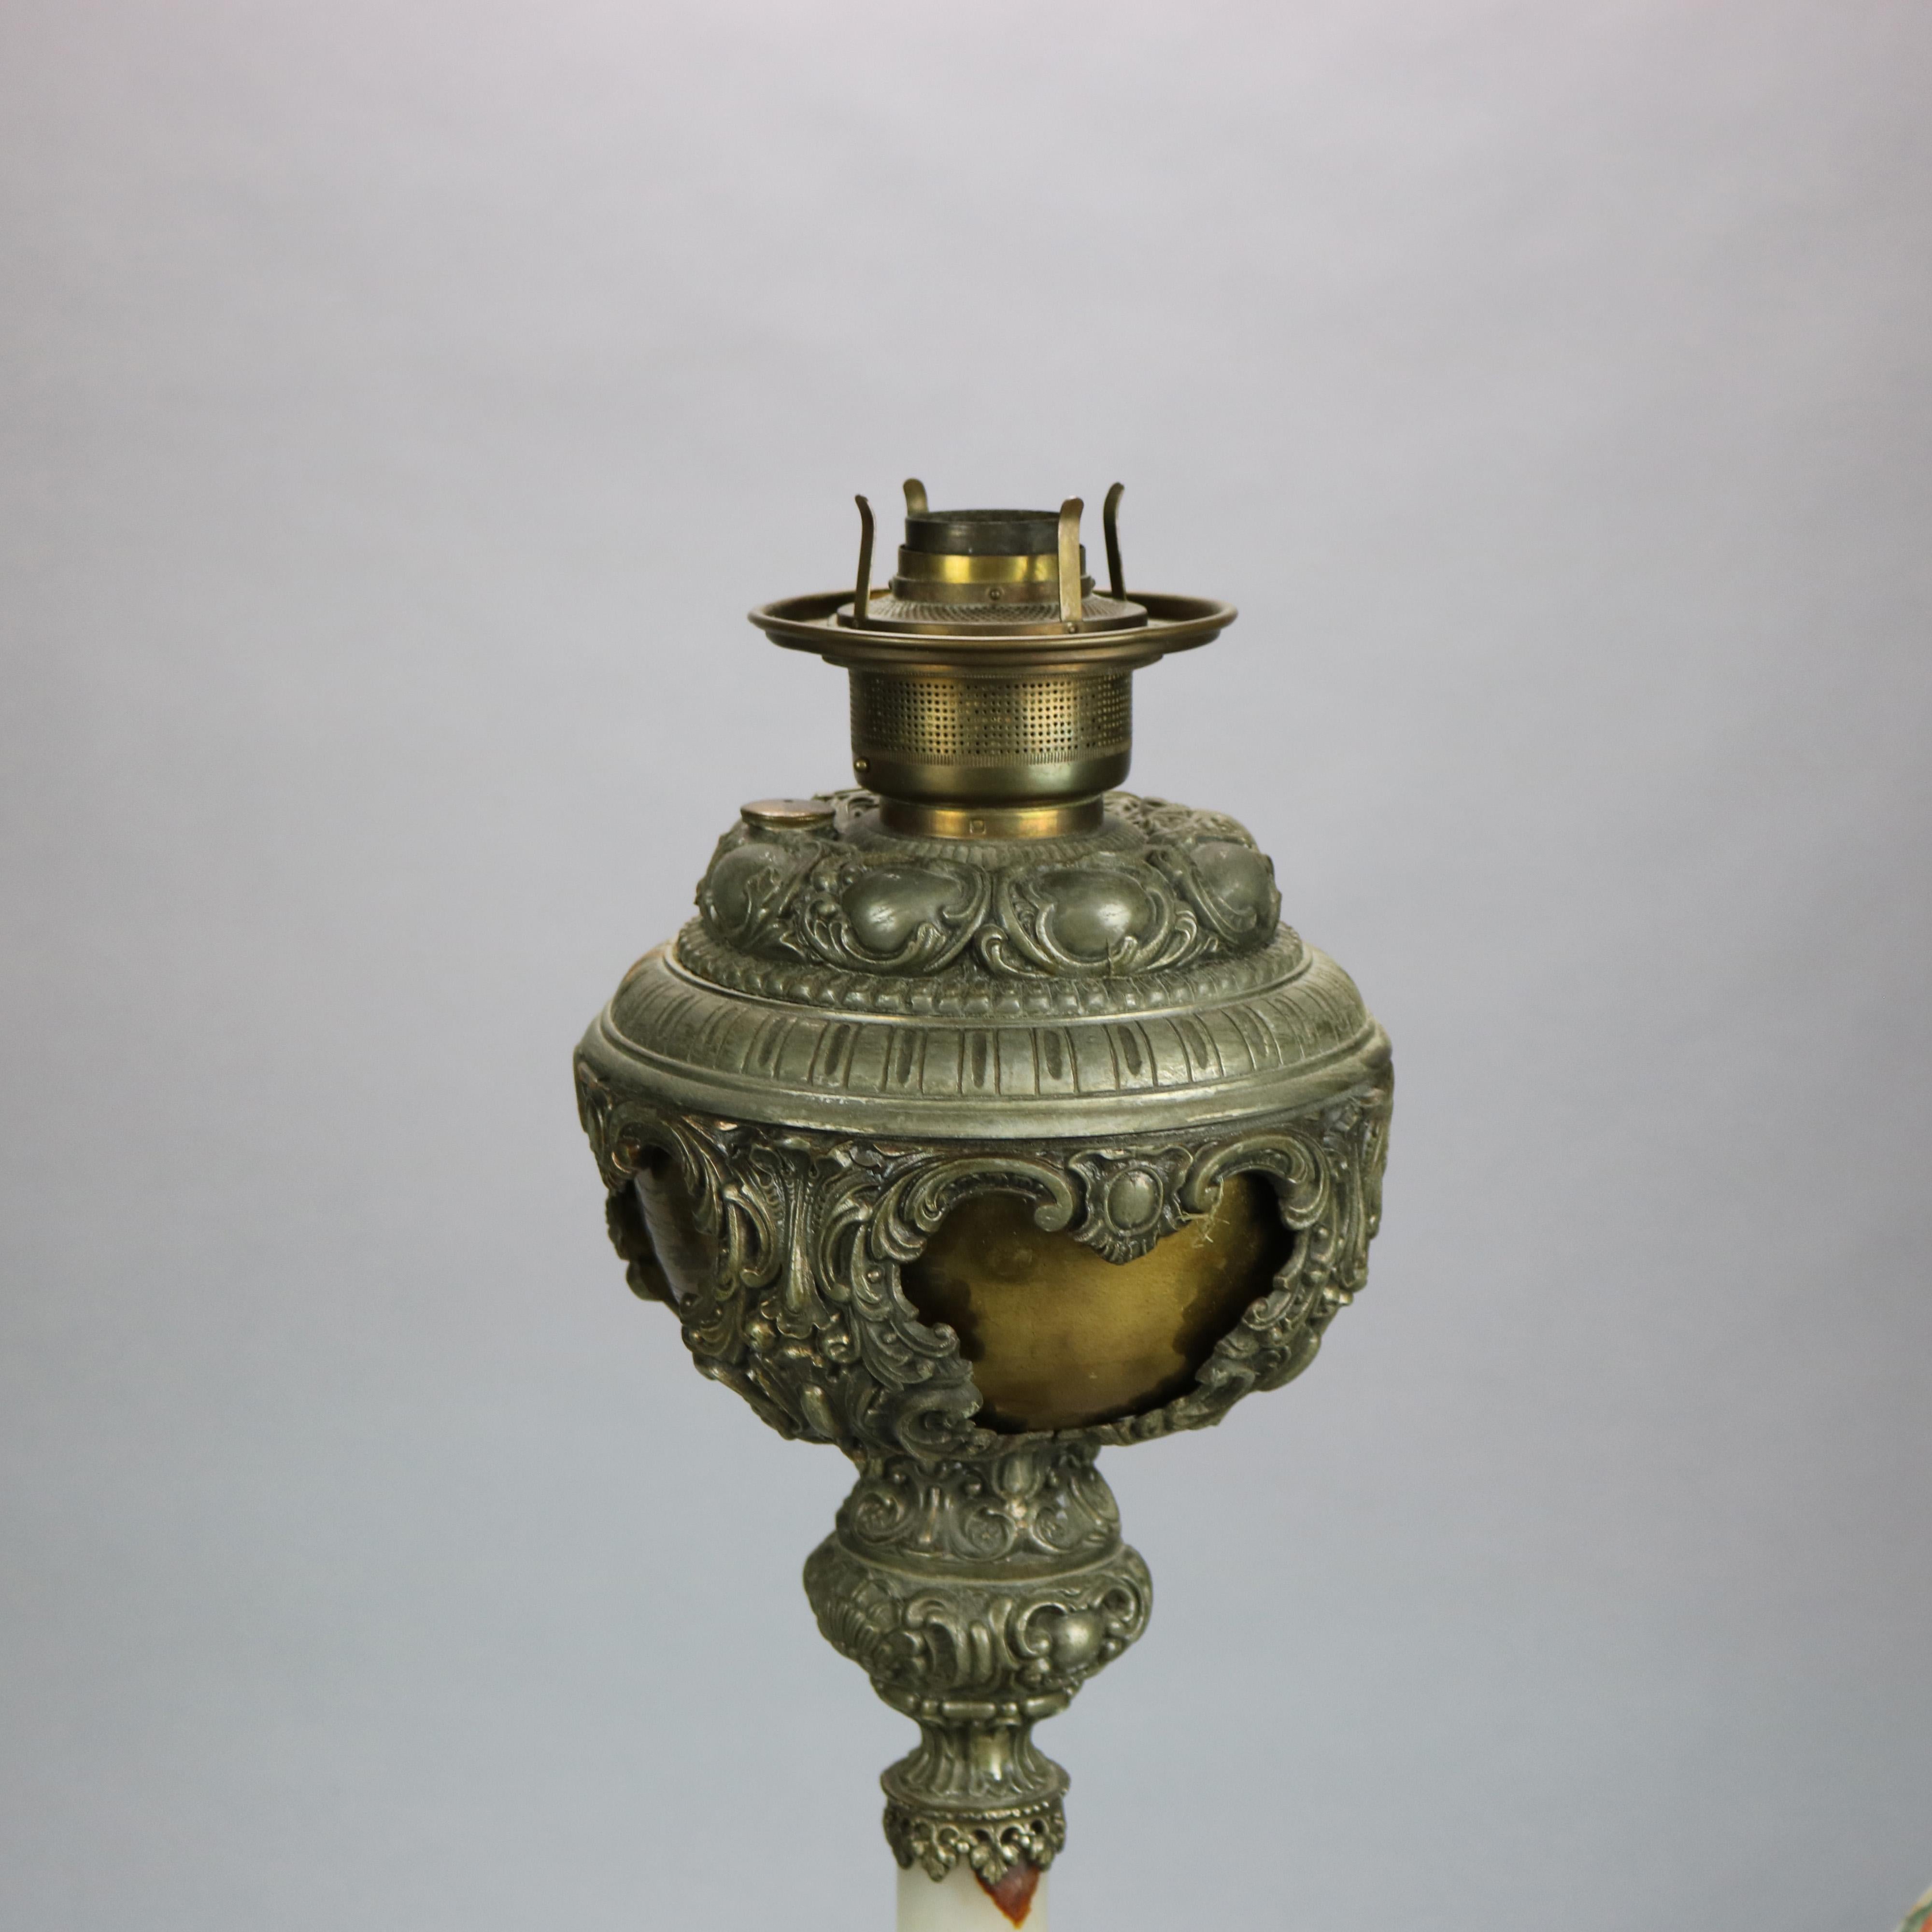 Cast Antique Victorian Onyx & Gilt Metal Parlor Lamp with Hand Painted Globe, c1890